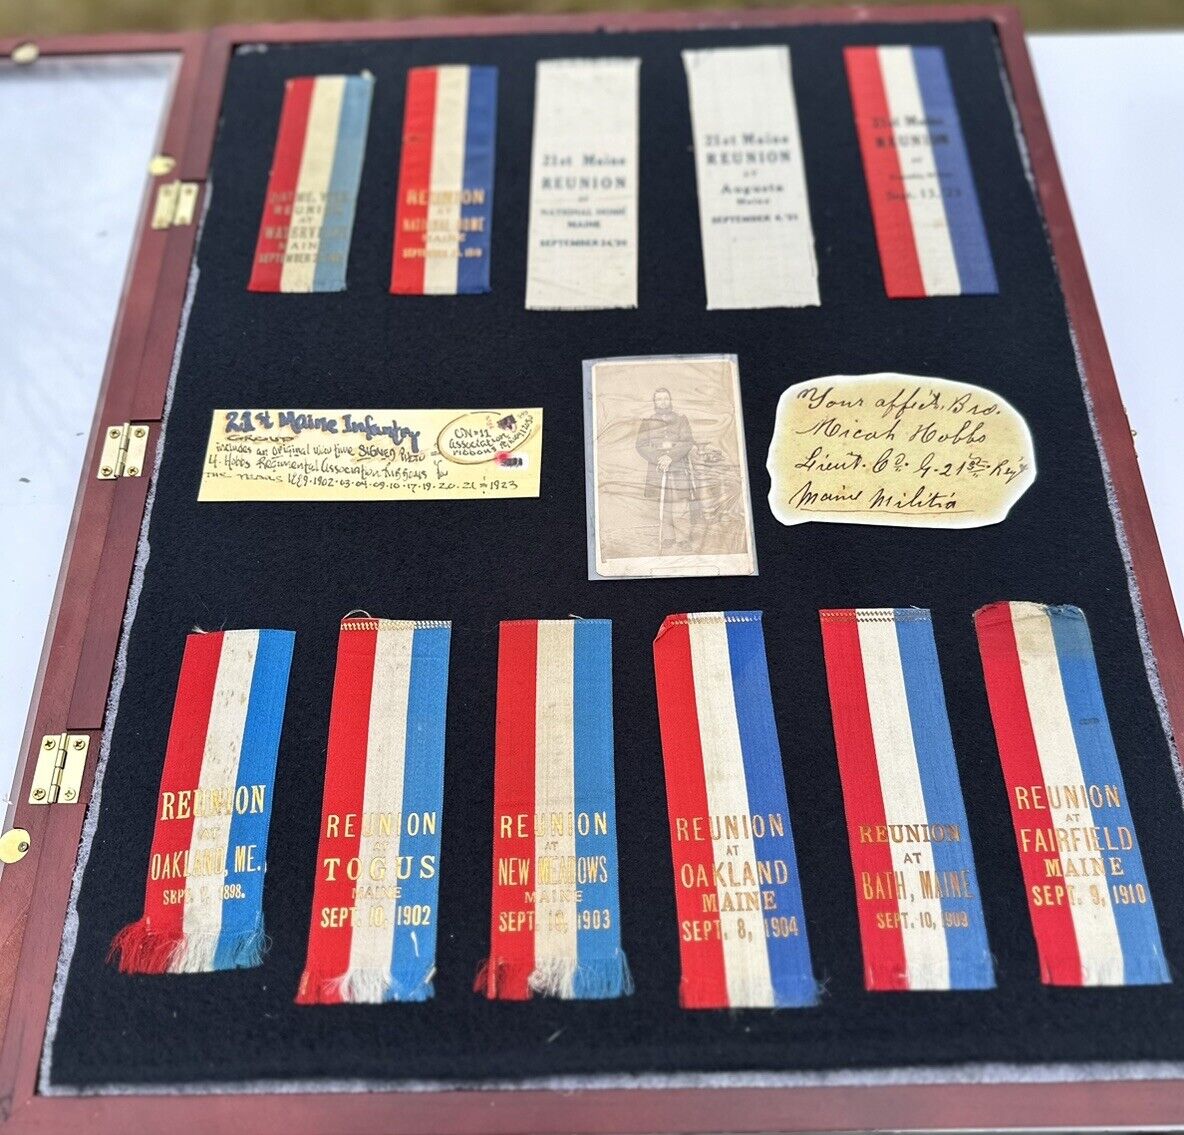 Interesting Group of Signed Cdv Lt Micah Hobbs 21st Maine and 10 Reunion Ribbons